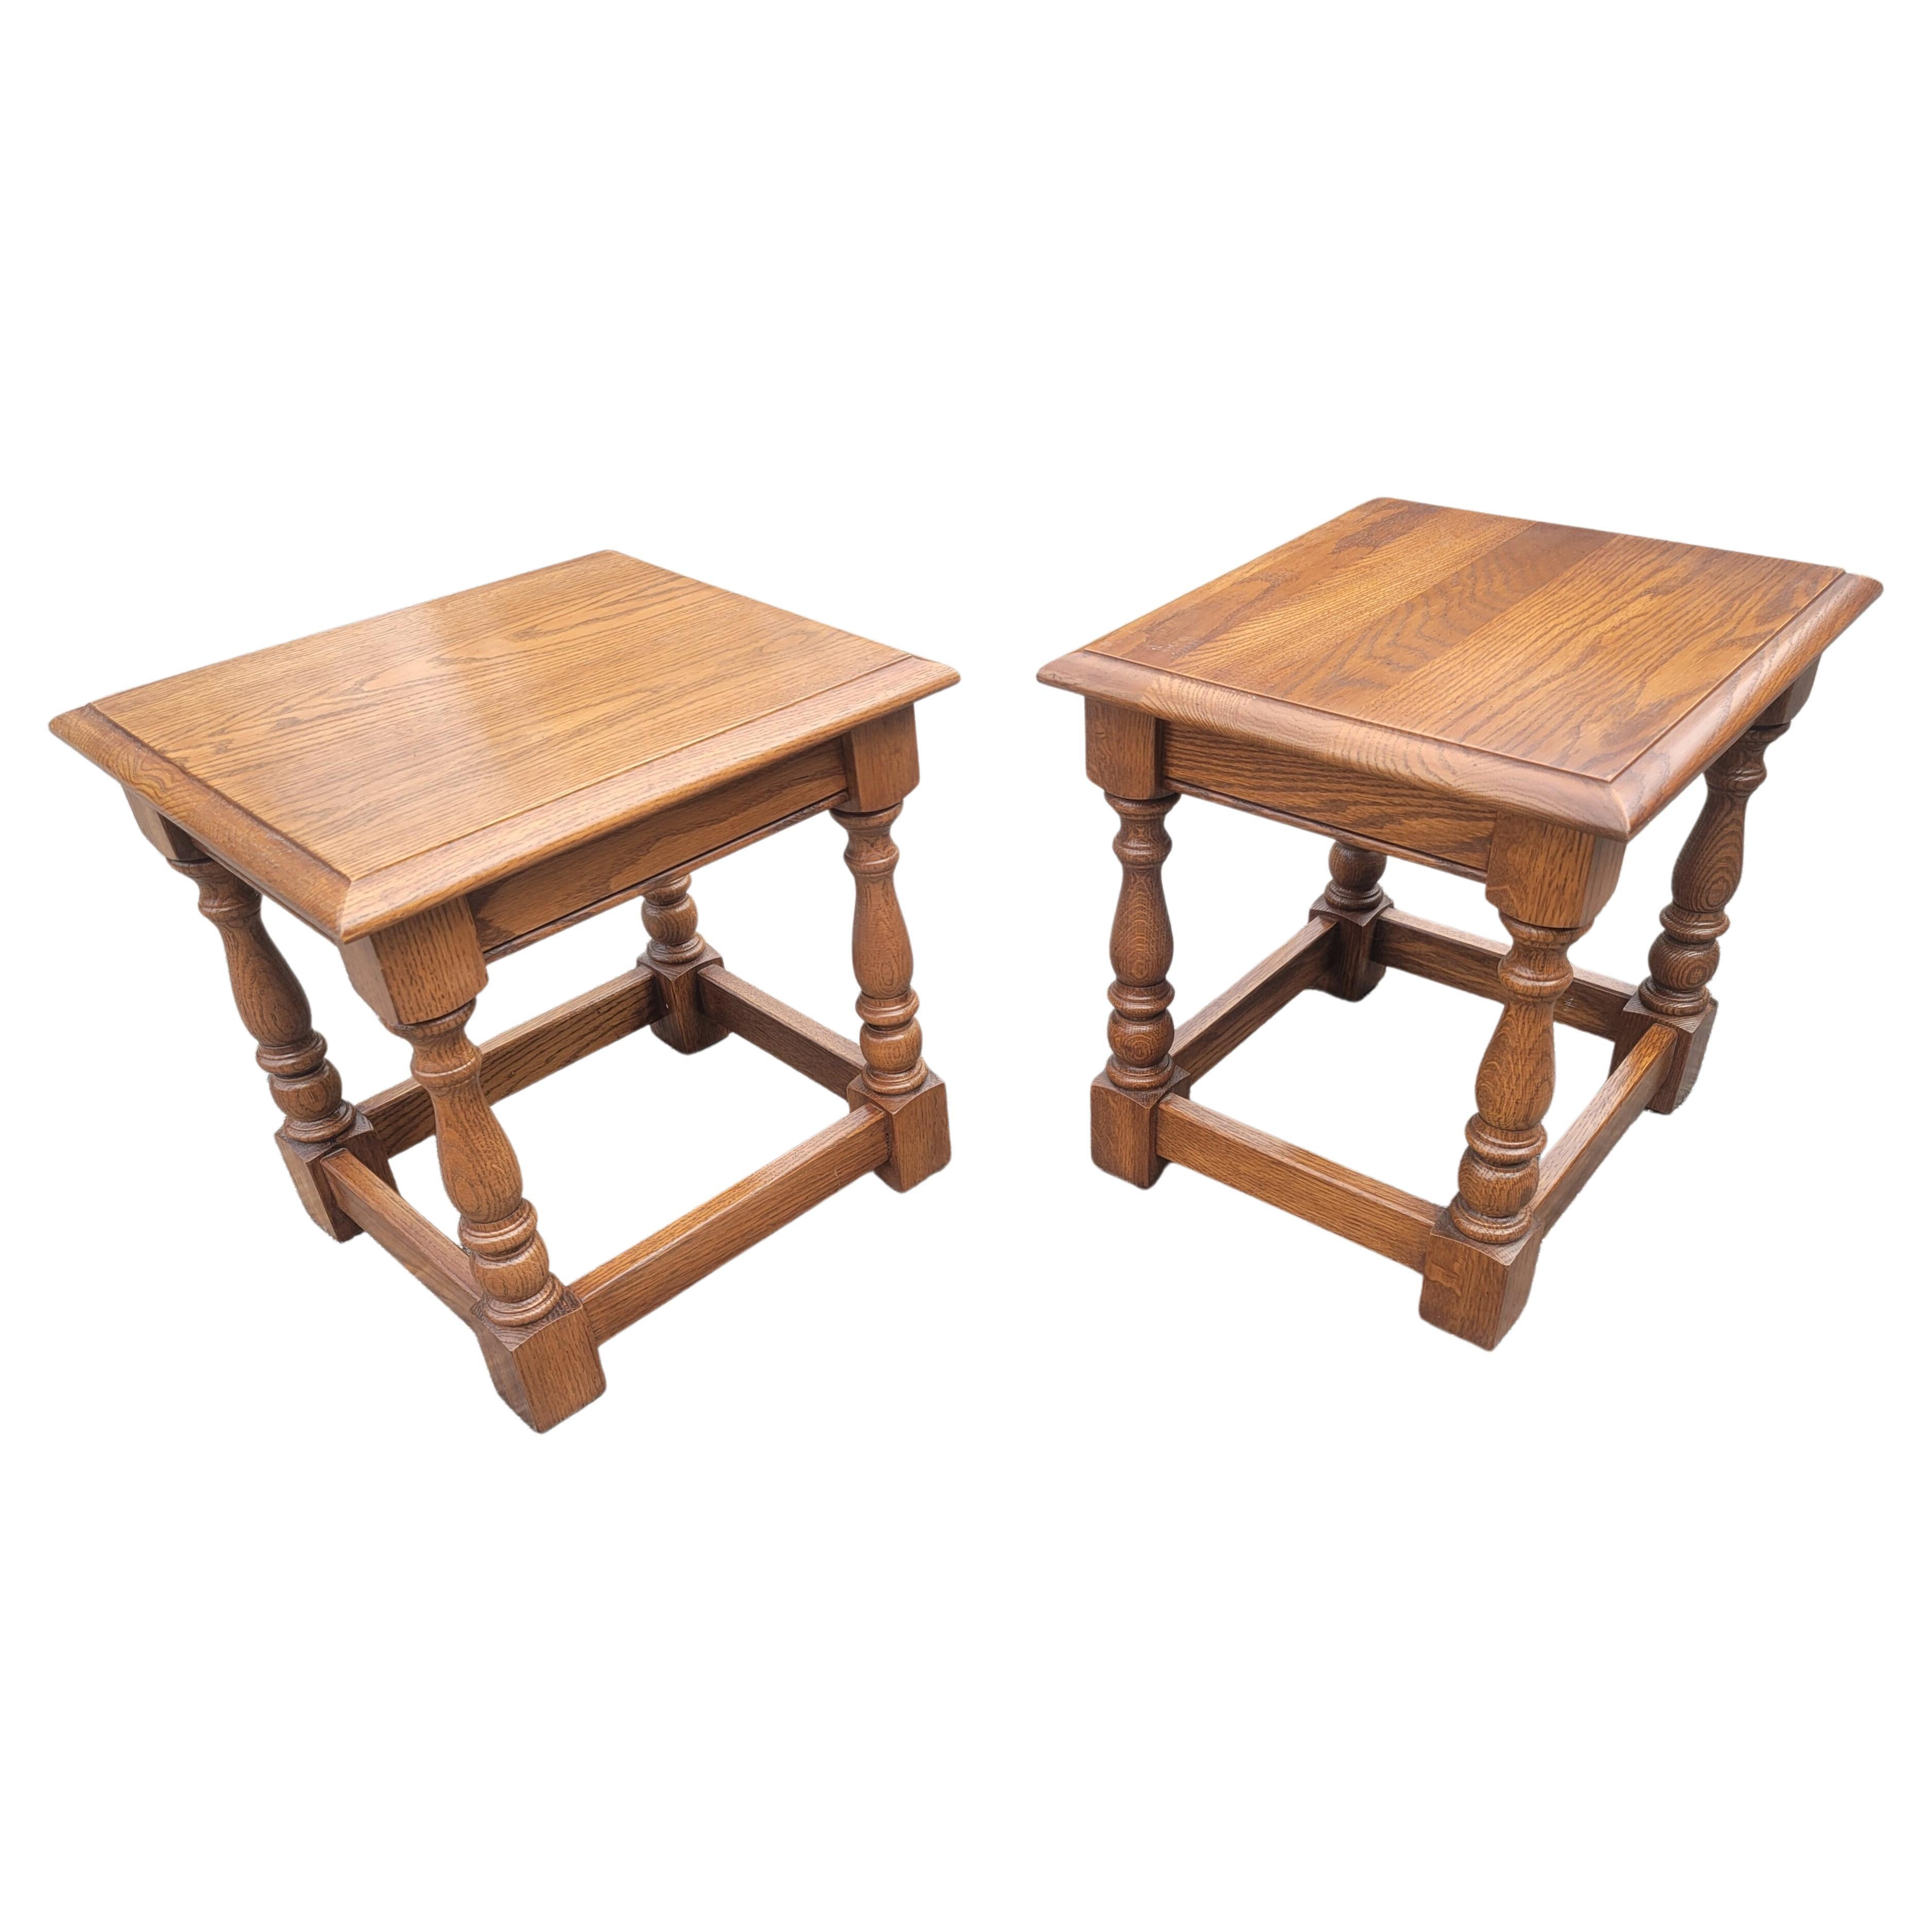 A solid pair of country view amish handcrafted mission oak low stools or footstools in great vintage condition. Measure 15 inches in width, 13.5 inches in depth and 15 inches tall.